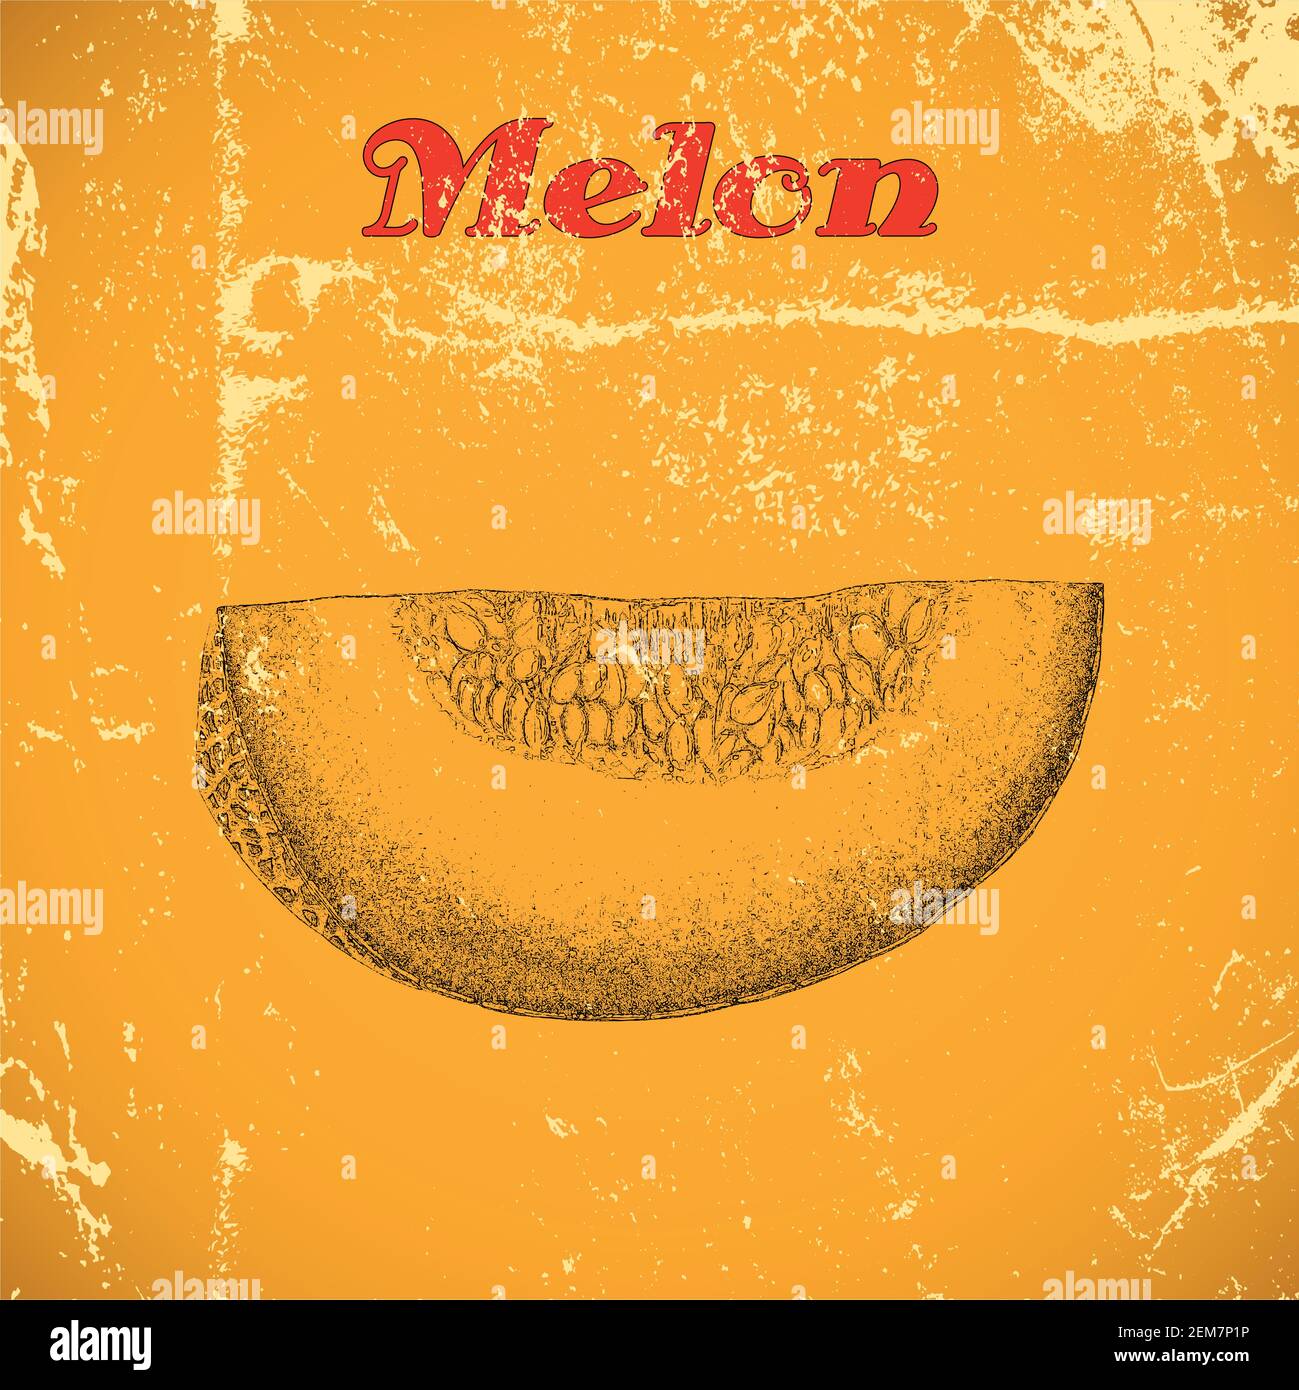 Hand drawn vintage melon isolated on yellow distressed grunge background. Stock Vector